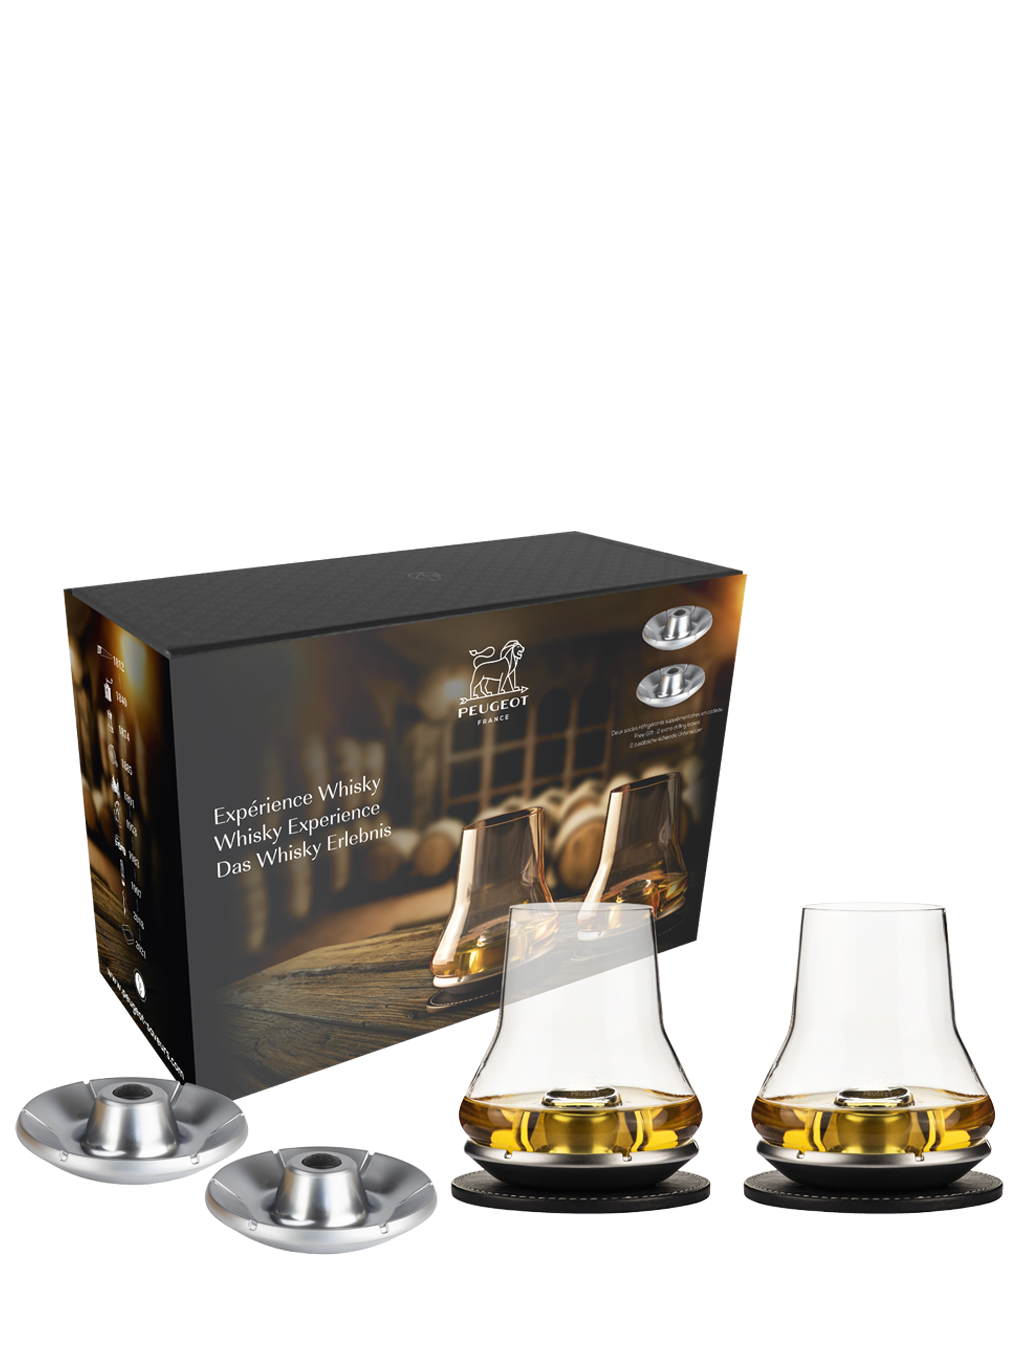 VERRES WHISKY EXPERIENCE PEUGEOT - Cocooning